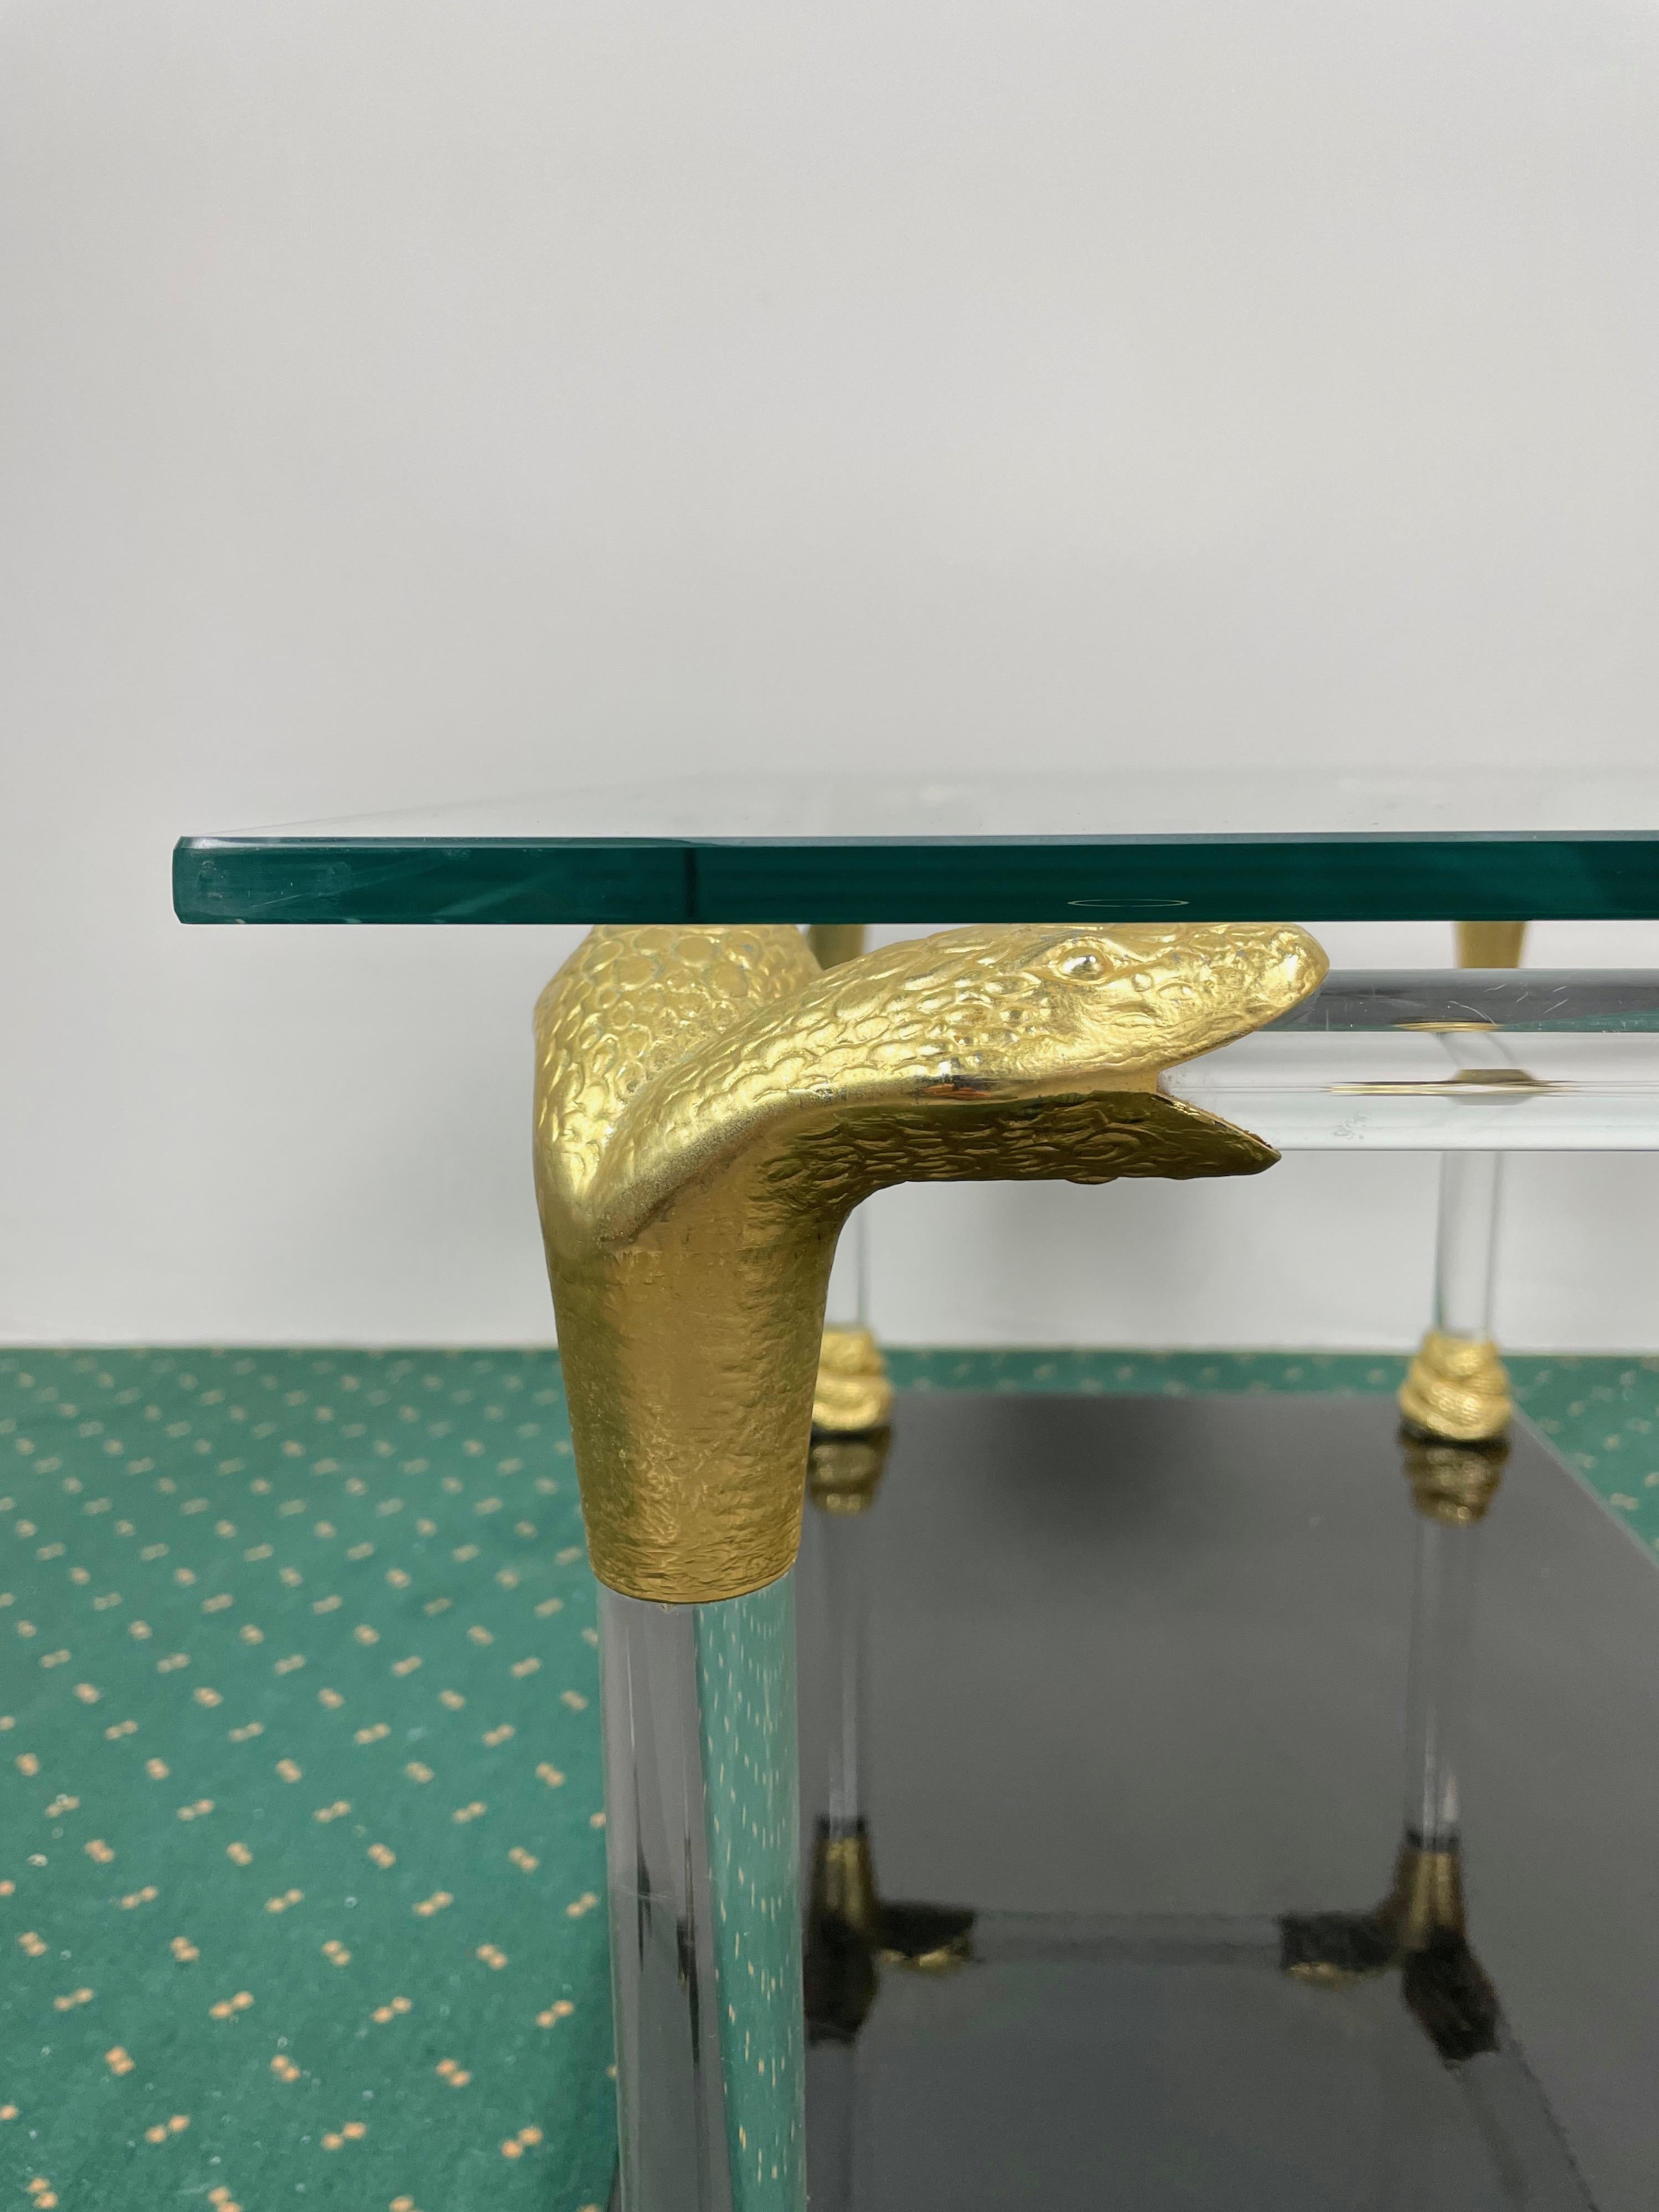 Lucite, Wood and Brass Coffee Table with Snake Head Details, Italy, 1970s For Sale 2